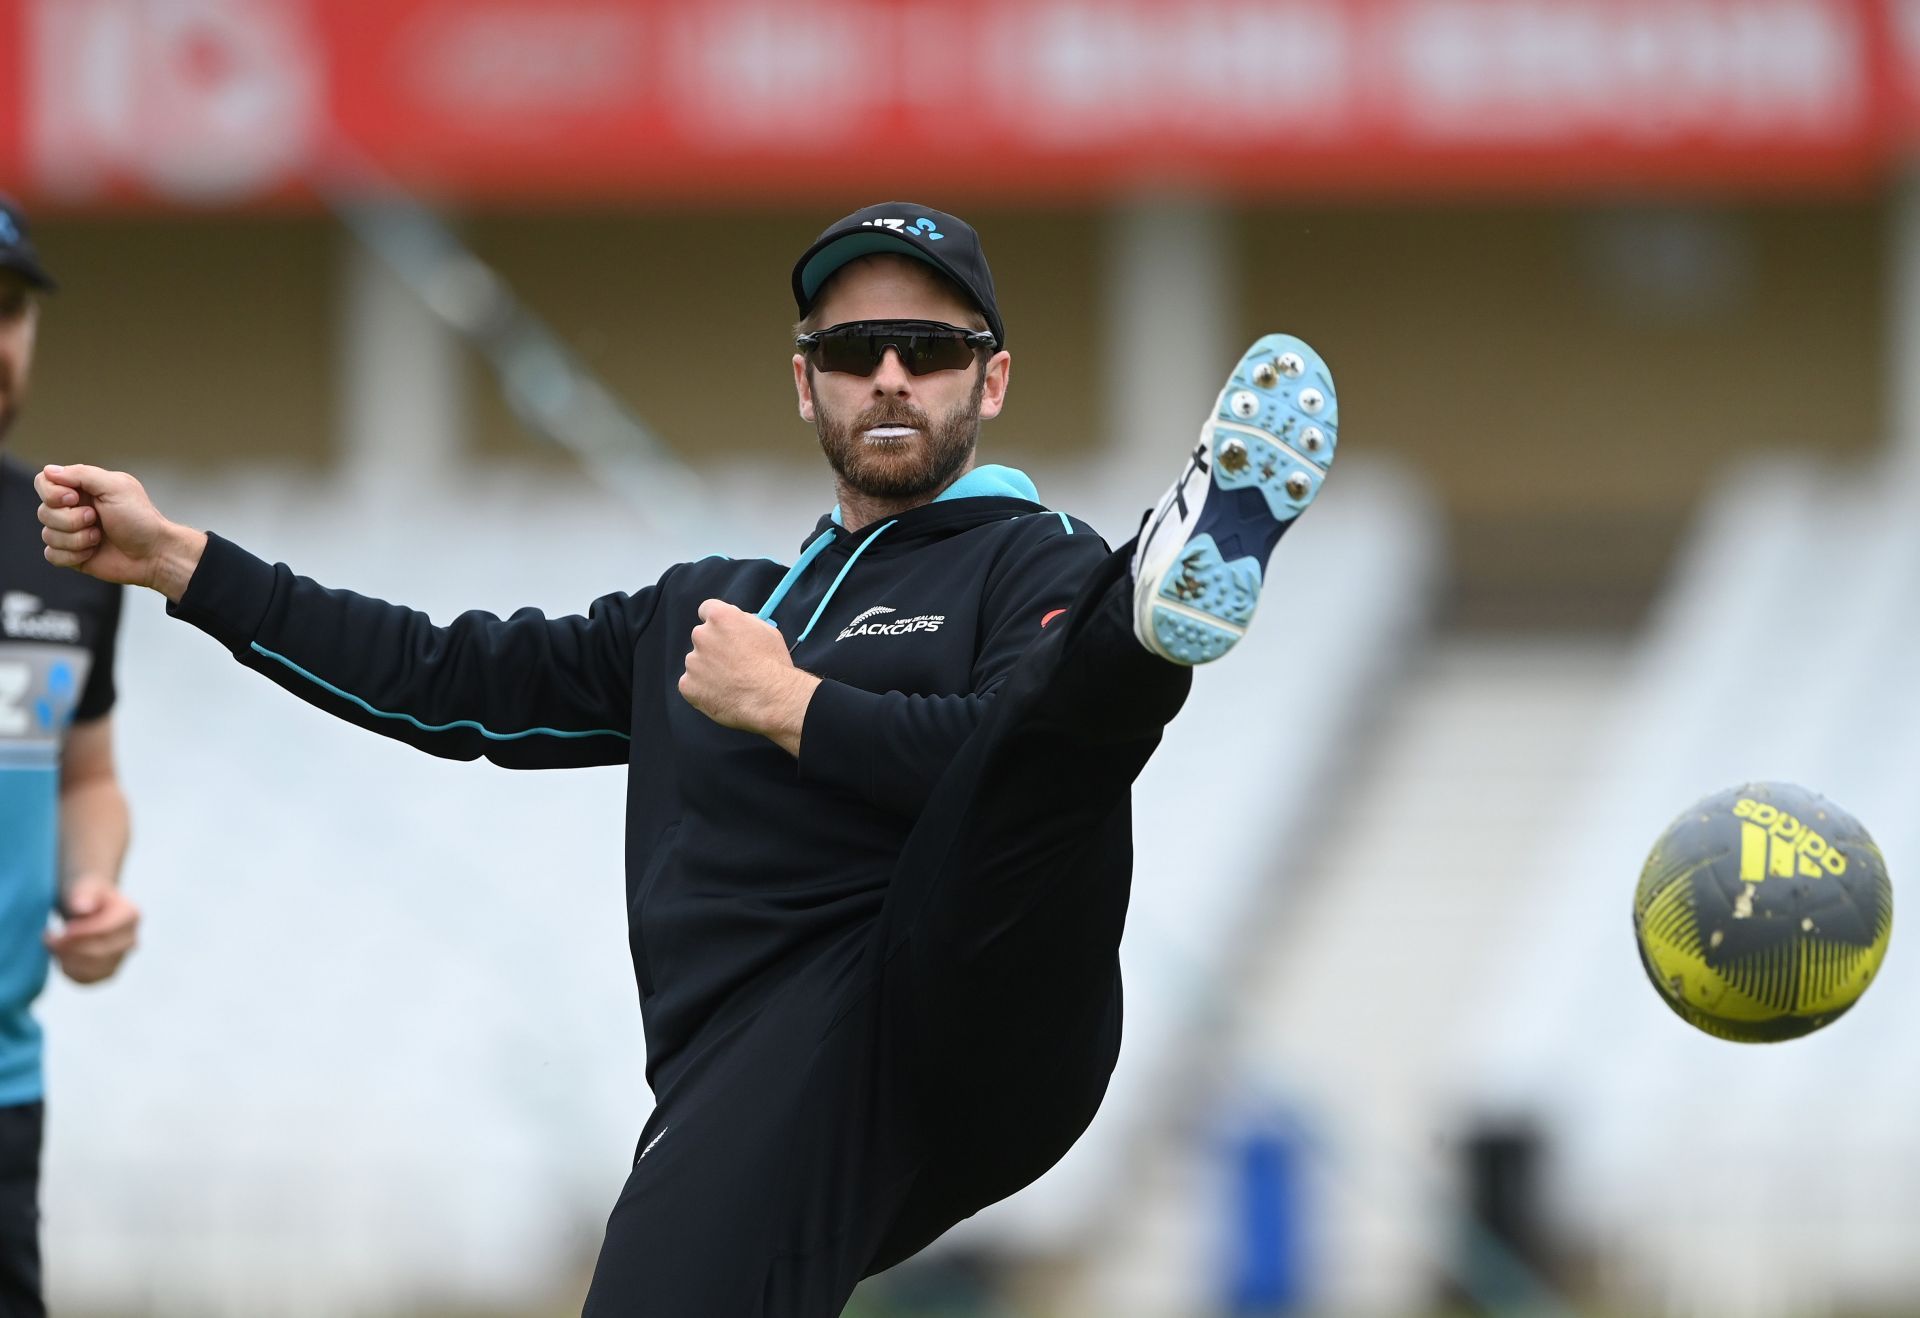 New Zealand skipper Kane Williamson missed the second Test at Trent Bridge having tested positive for COVID-19.